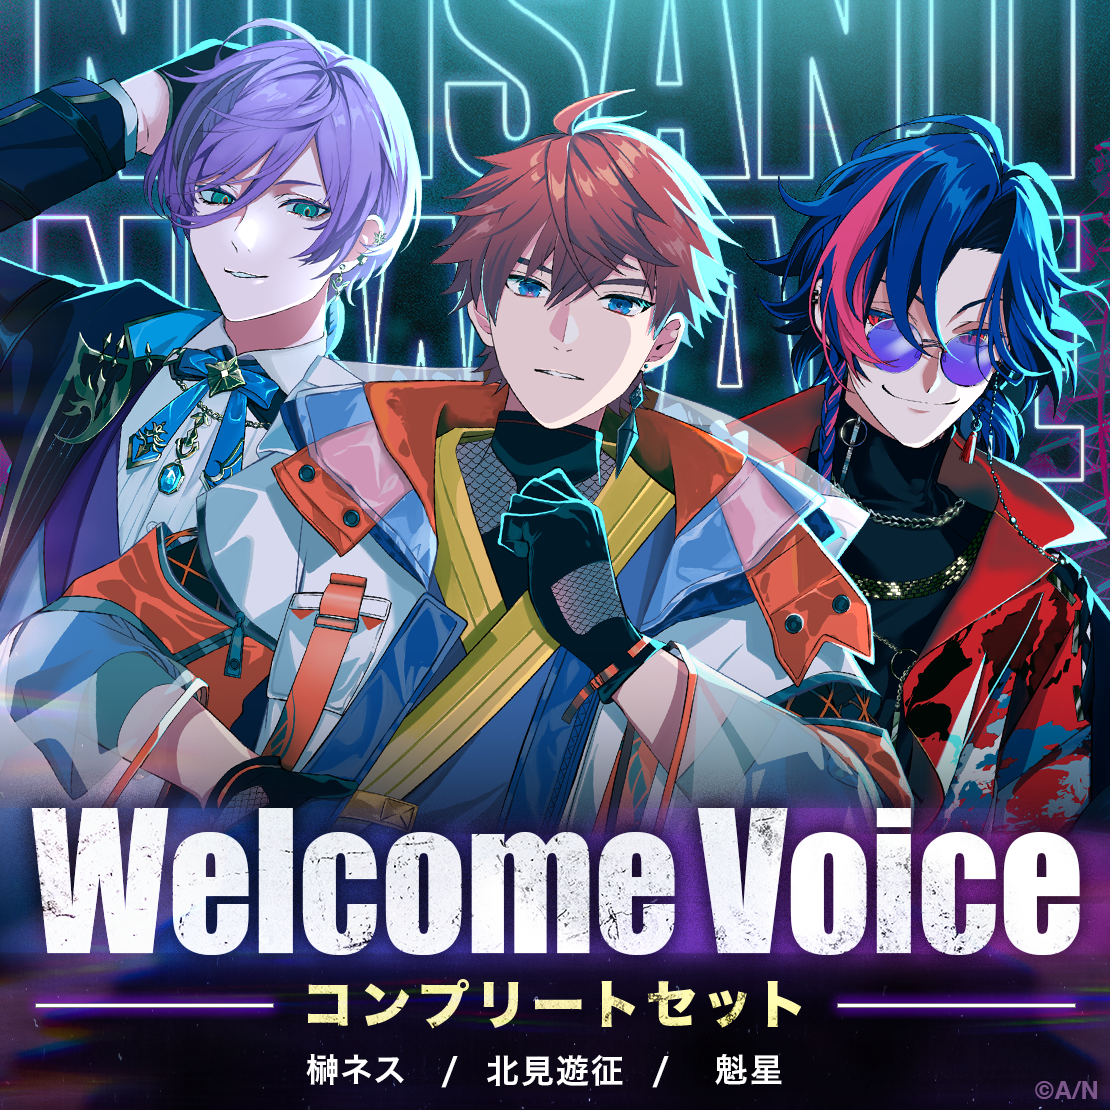 【Welcome Voice】3SKM コンプリートセット